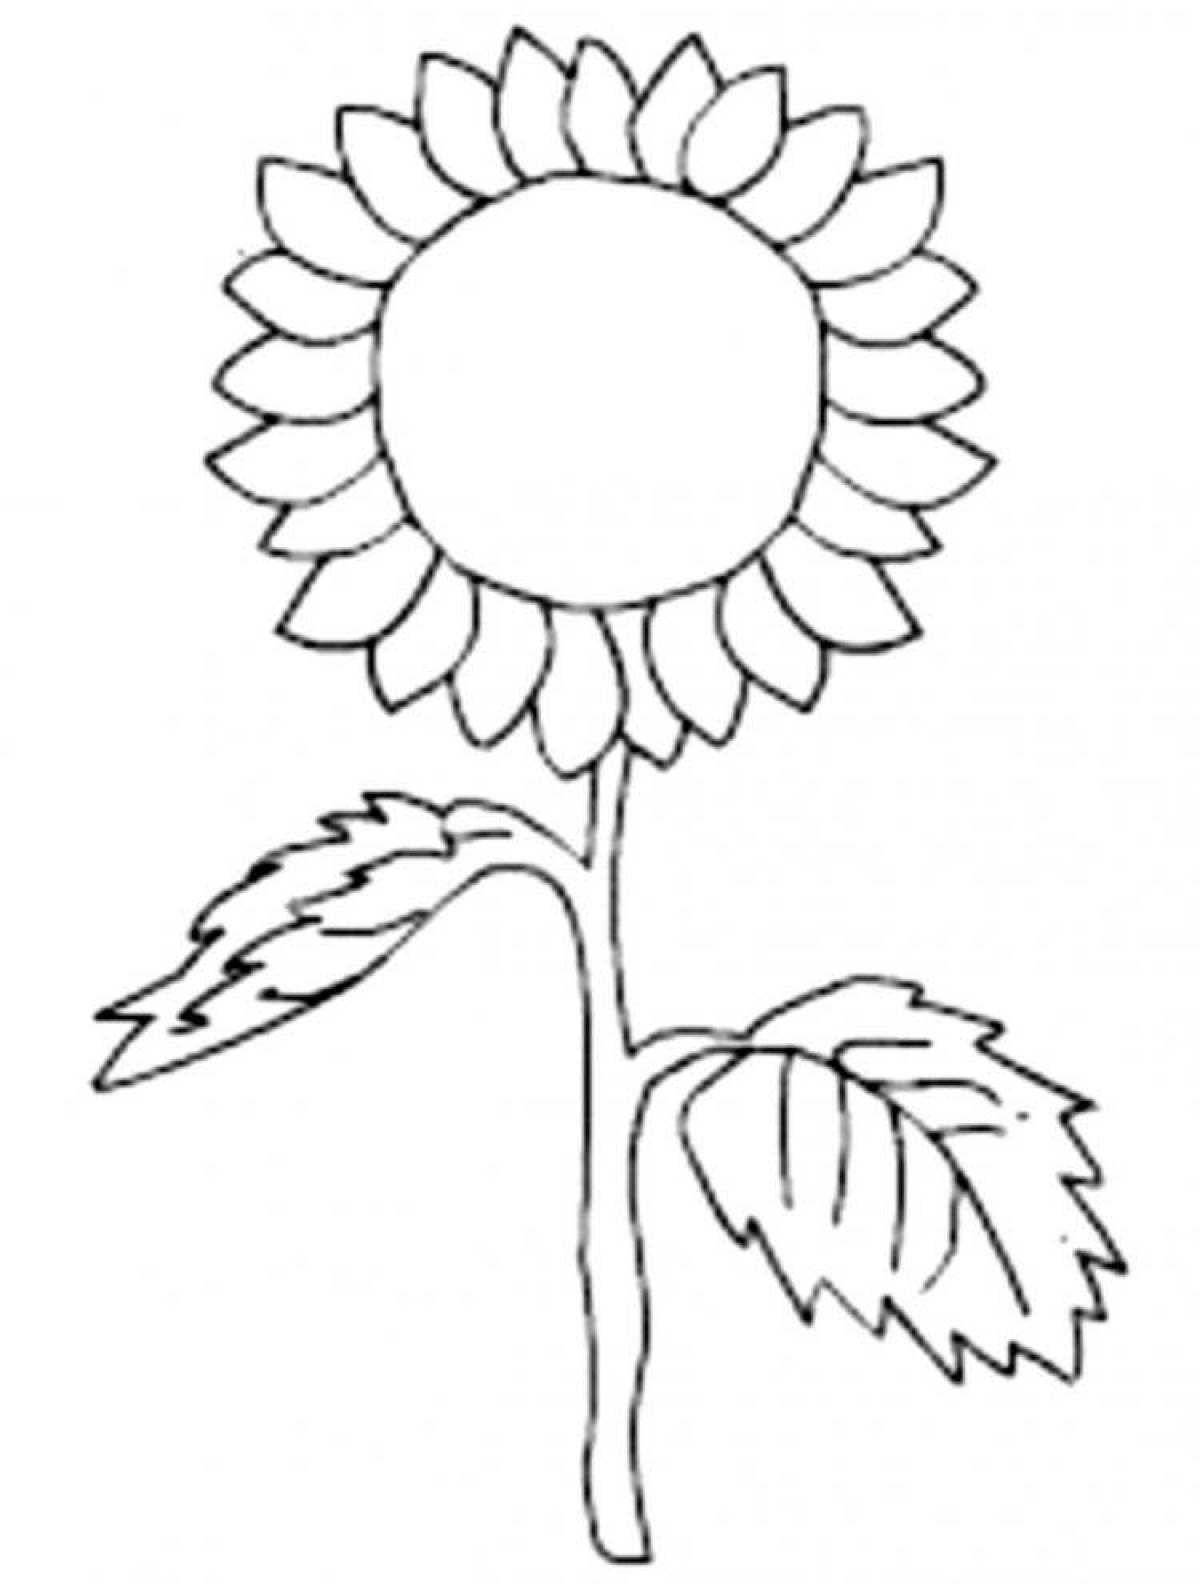 Coloring book shining sunflower for kids